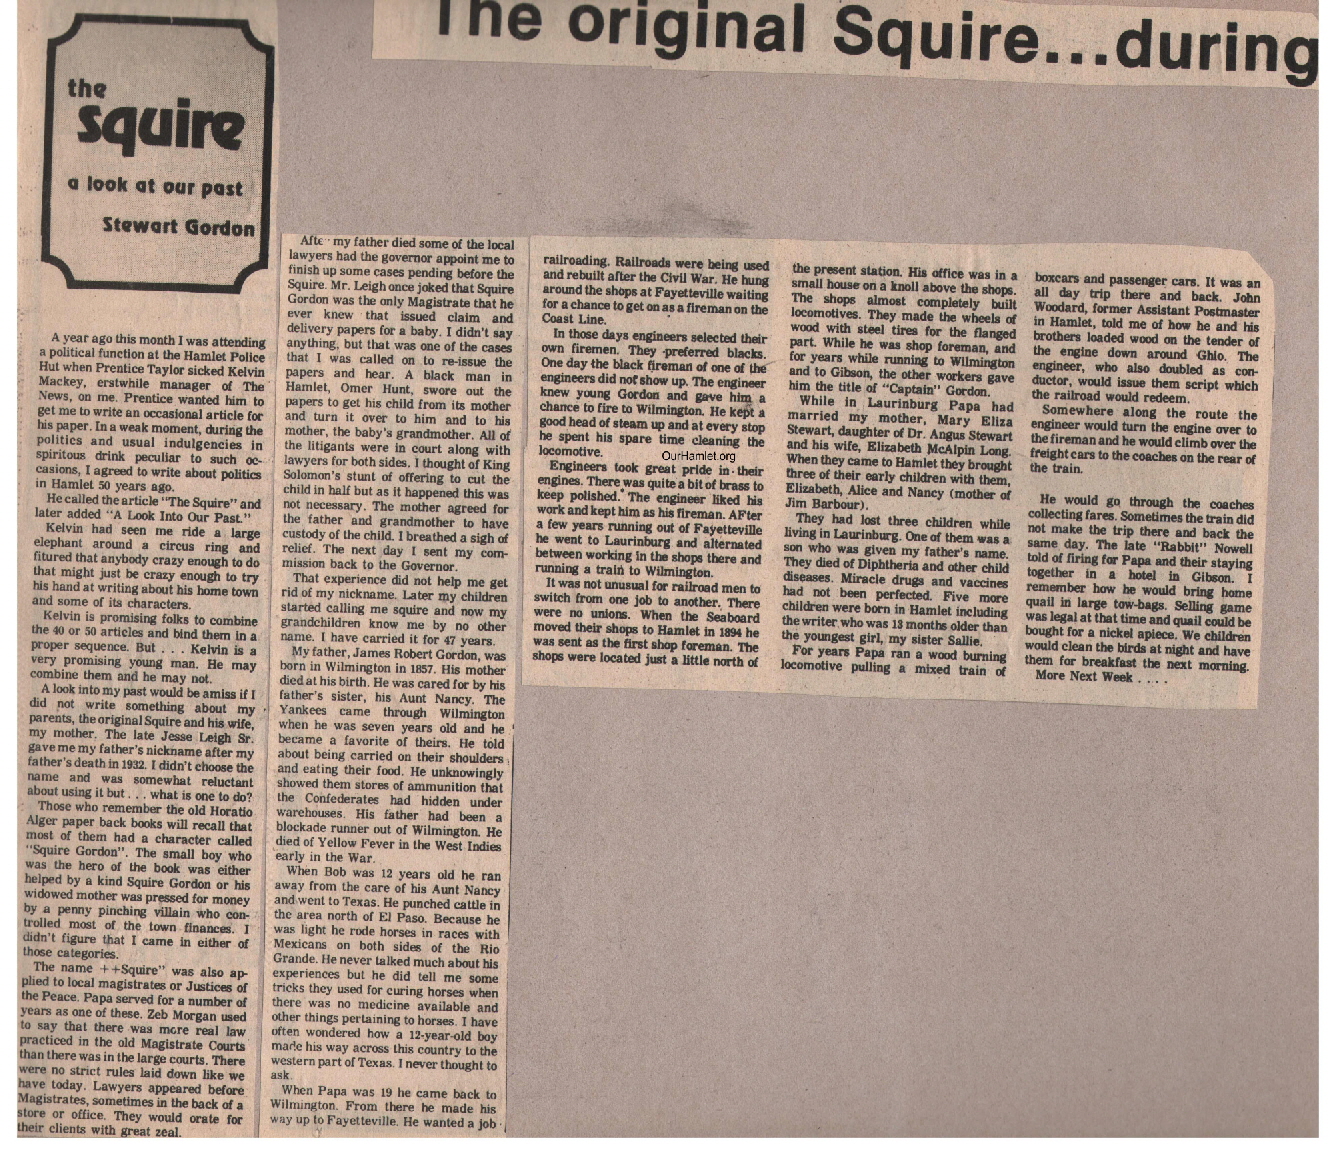 The Squire - The original Squire a OH